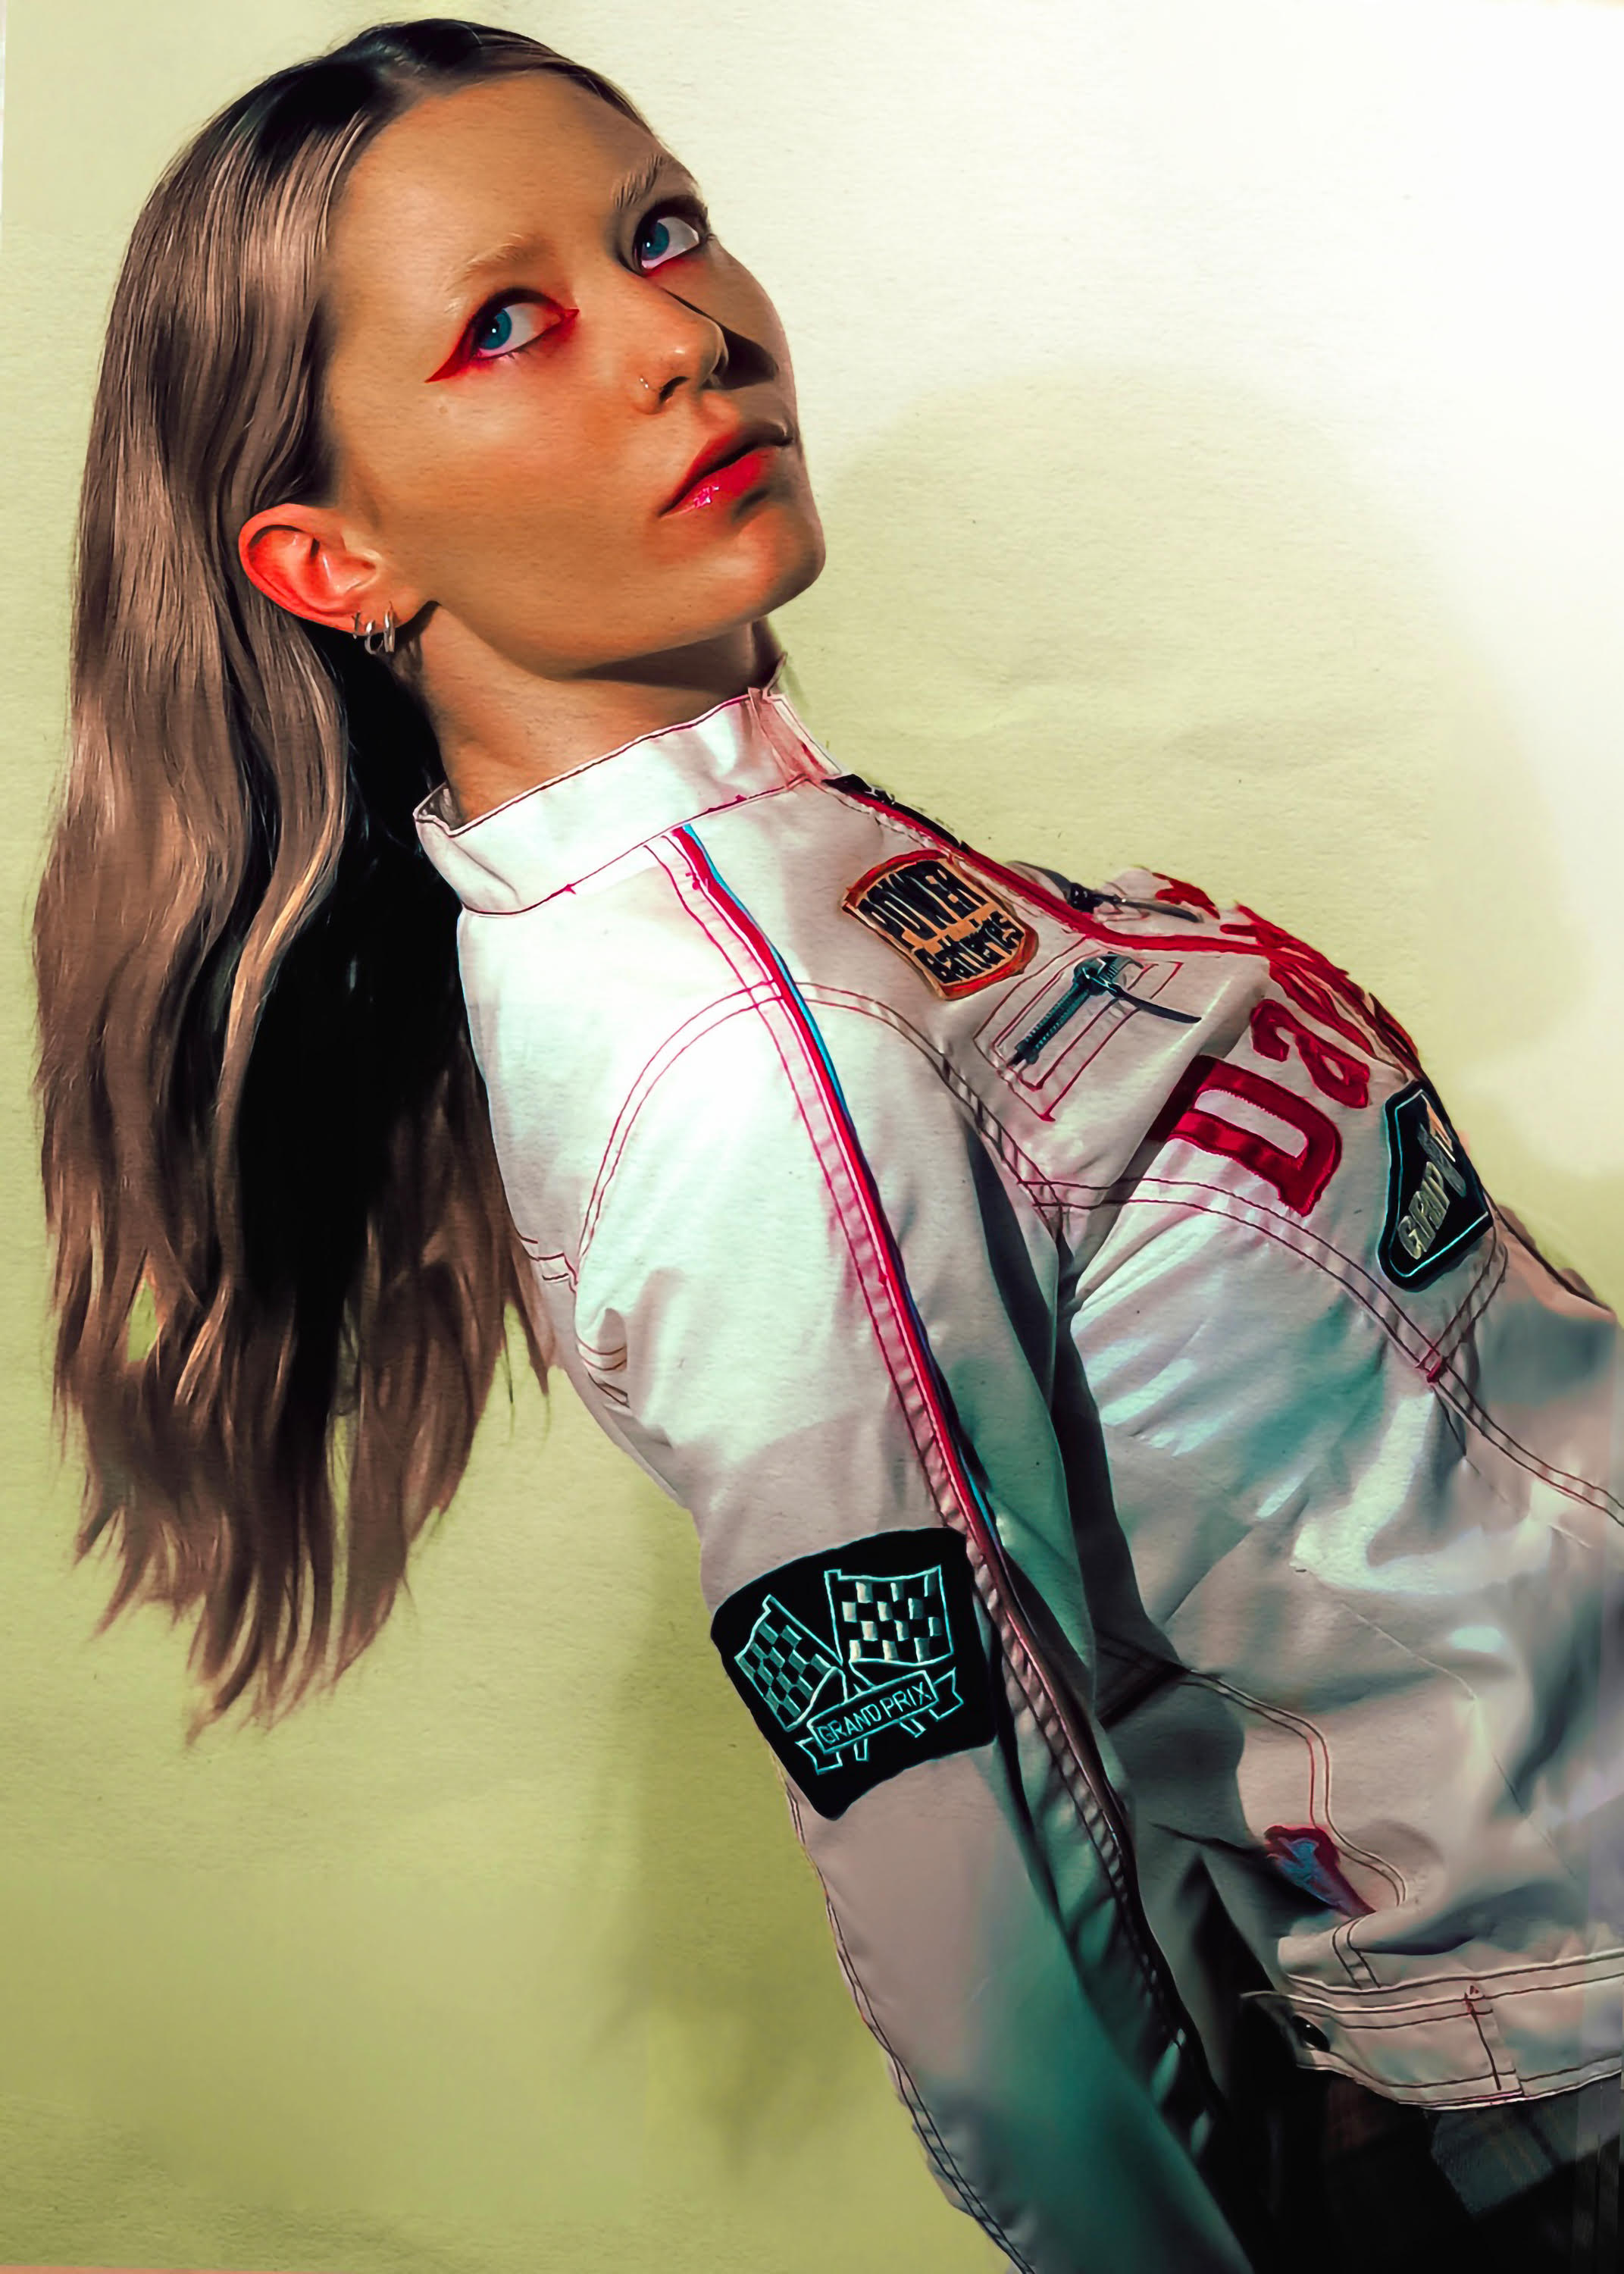  The artist Lois wearing a white biker jacket and styling graphic red eyeliner whilst leaning into the centre of the page